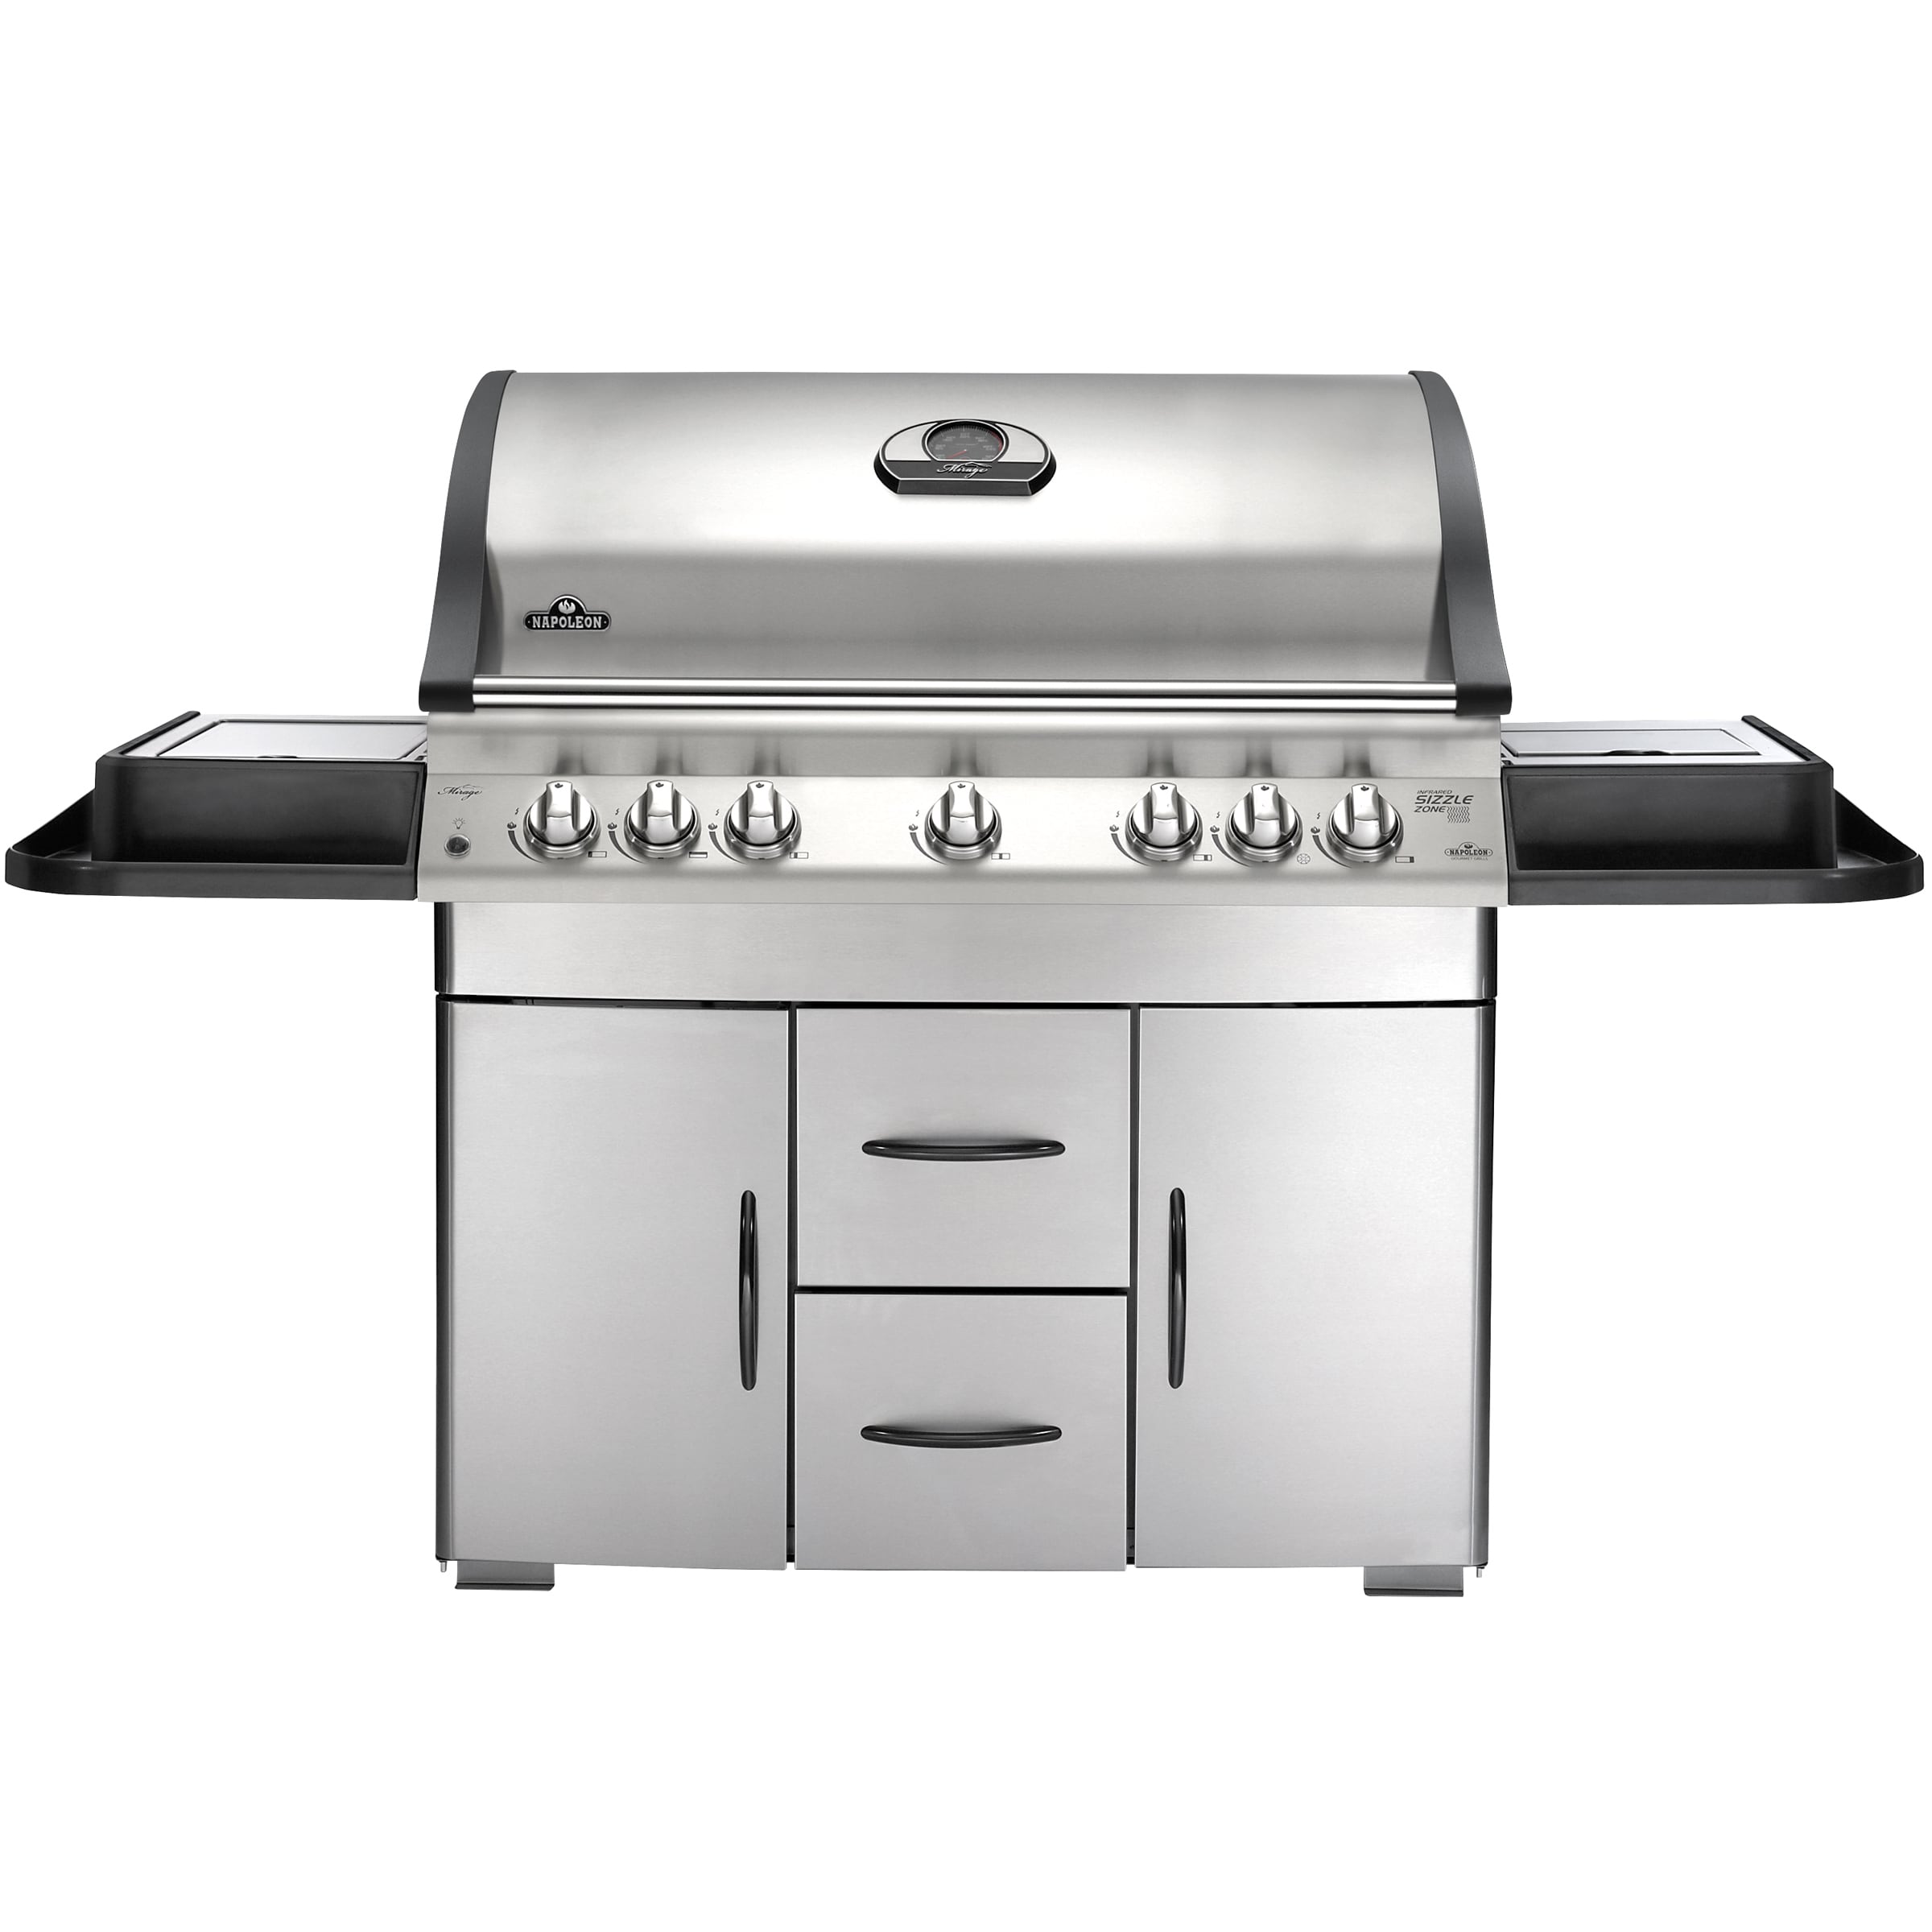 Napoleon Mirage M730rsbipss Propane Grill With Infrared Rear And Side Burner